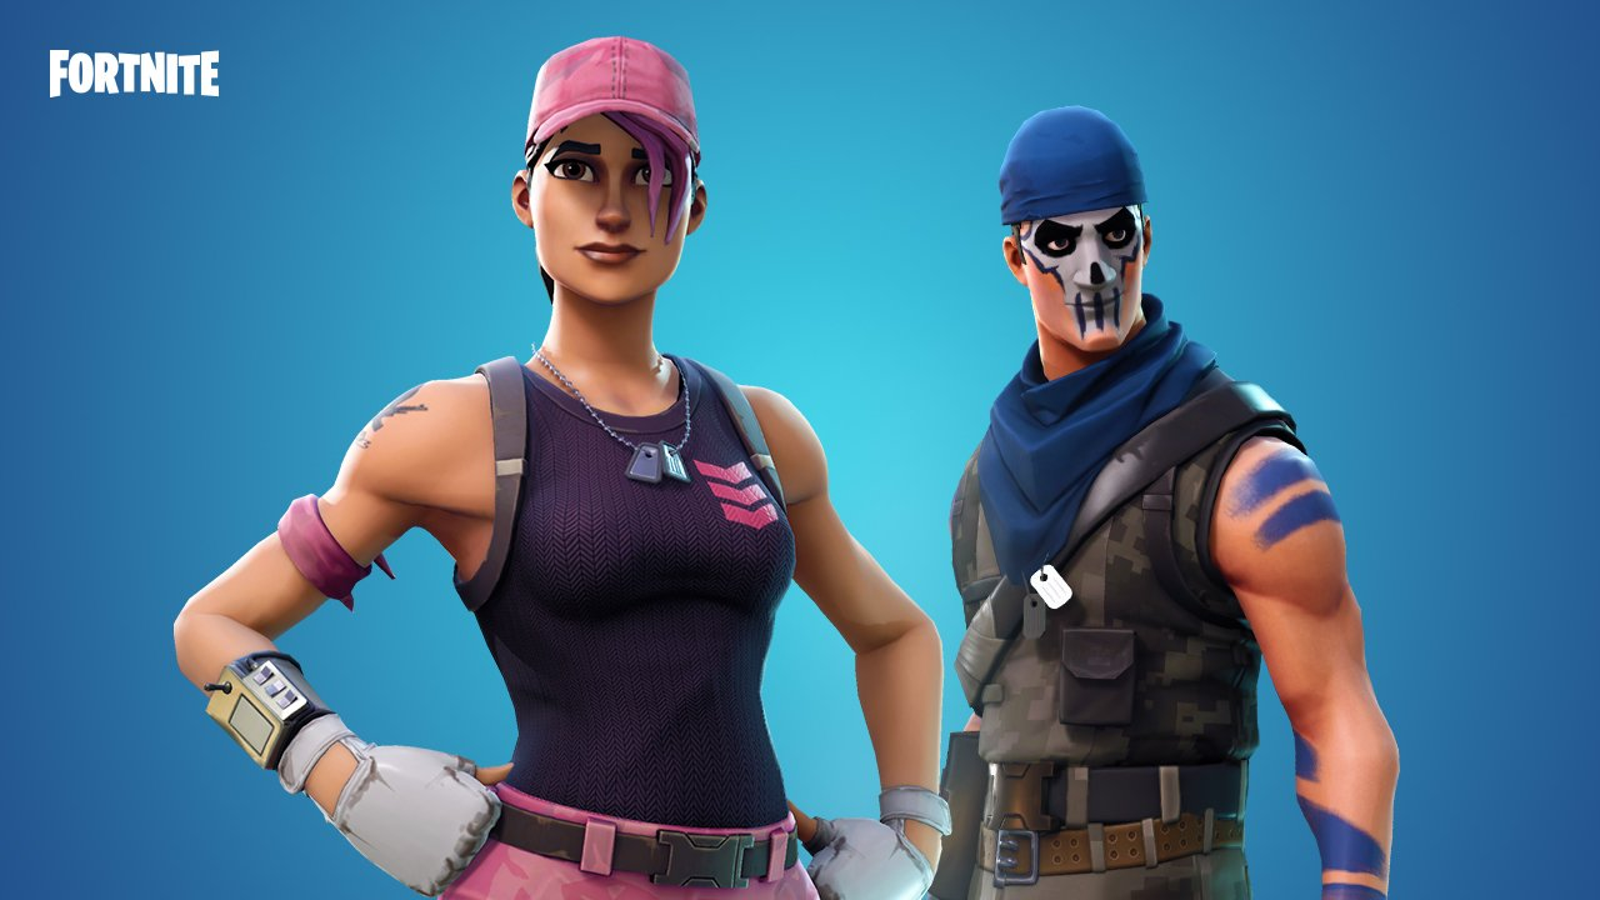 Epic wants to prevent keyboard and mouse players from dominating Fortnite